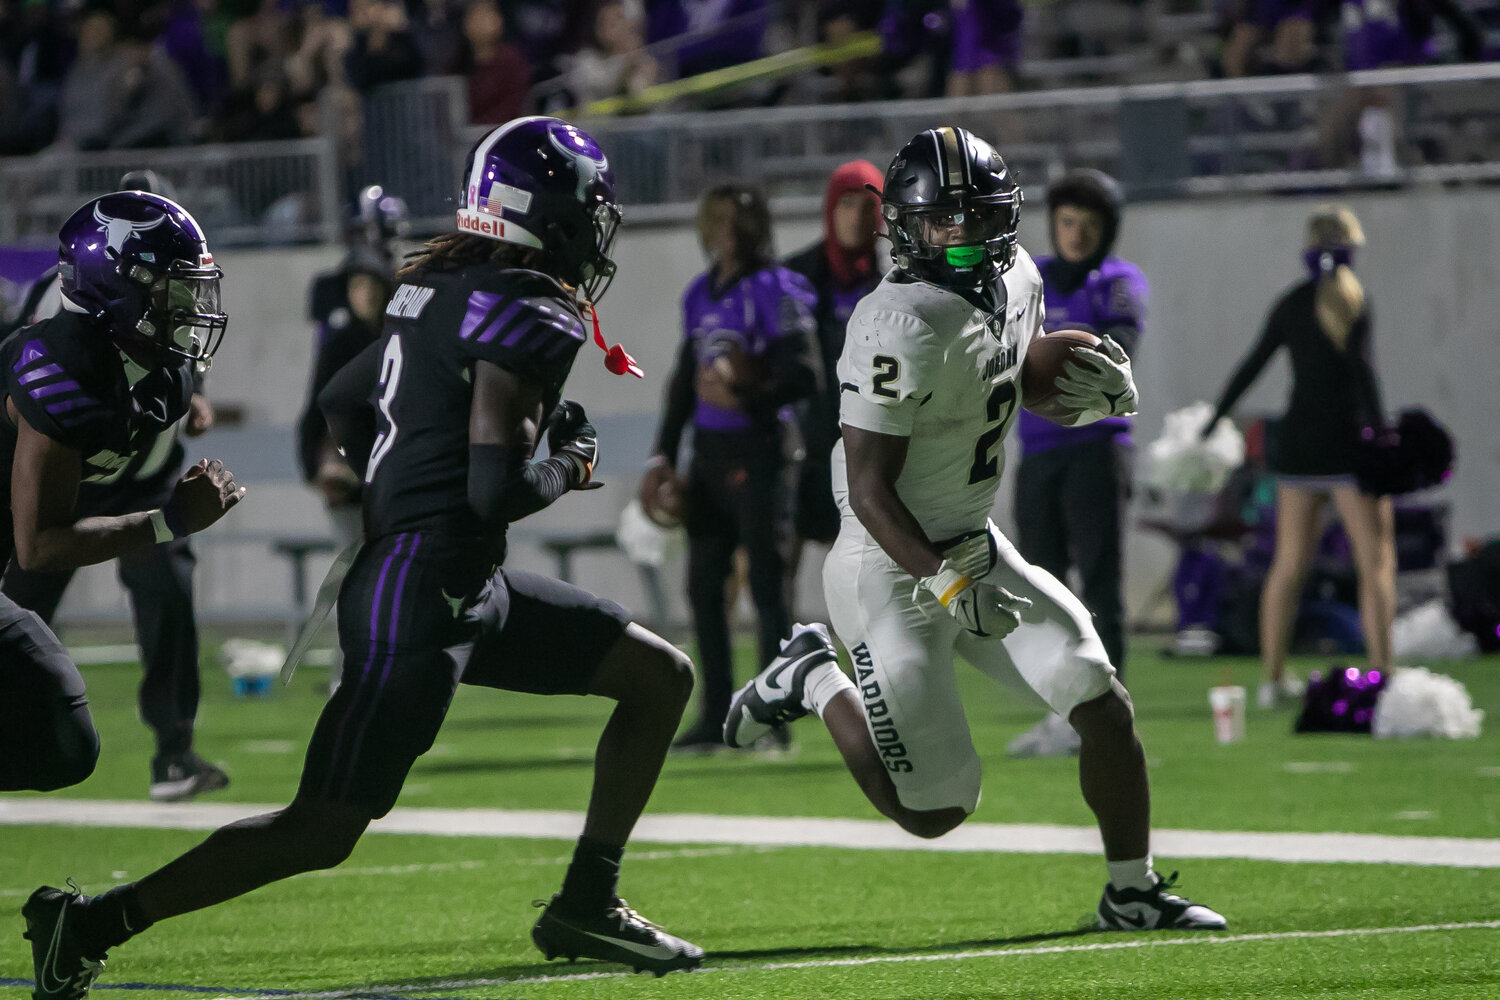 Chad Gasper runs into the endzone during Thursday's game between Jordan and Morton Ranch at Legacy Stadium.